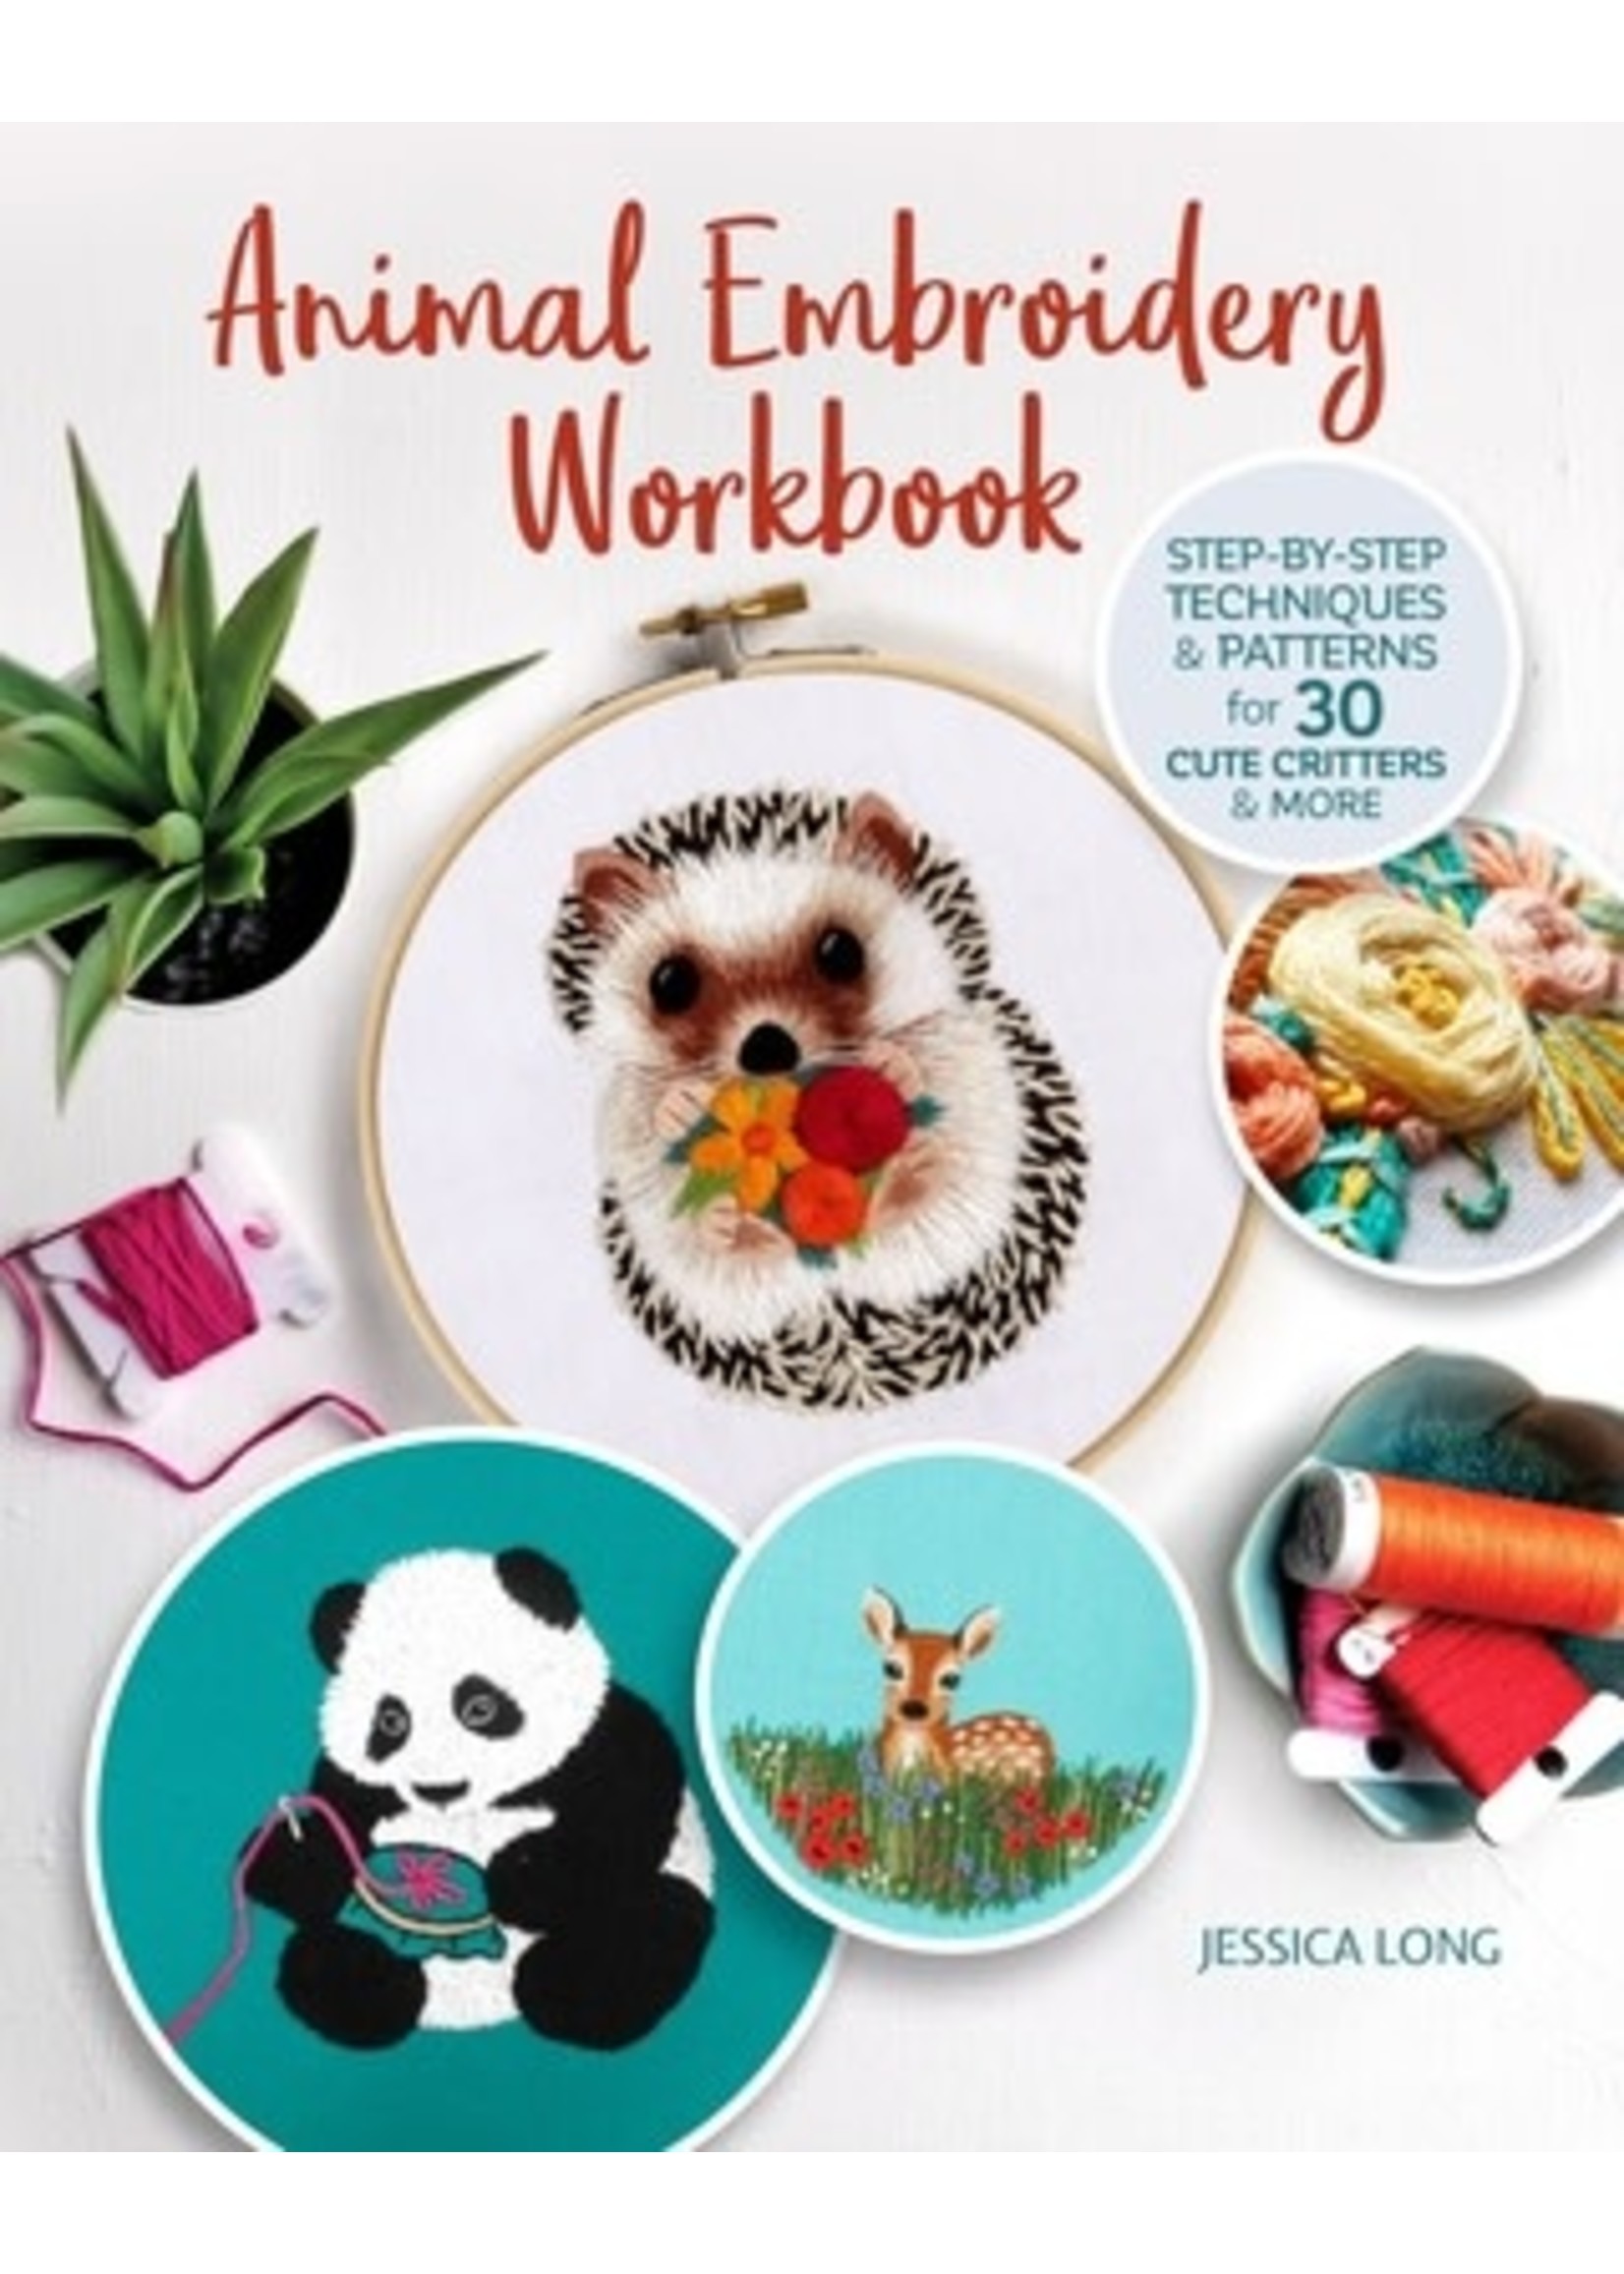 Cute Critters: An Embroidery Pattern Compendium by Jessica Long